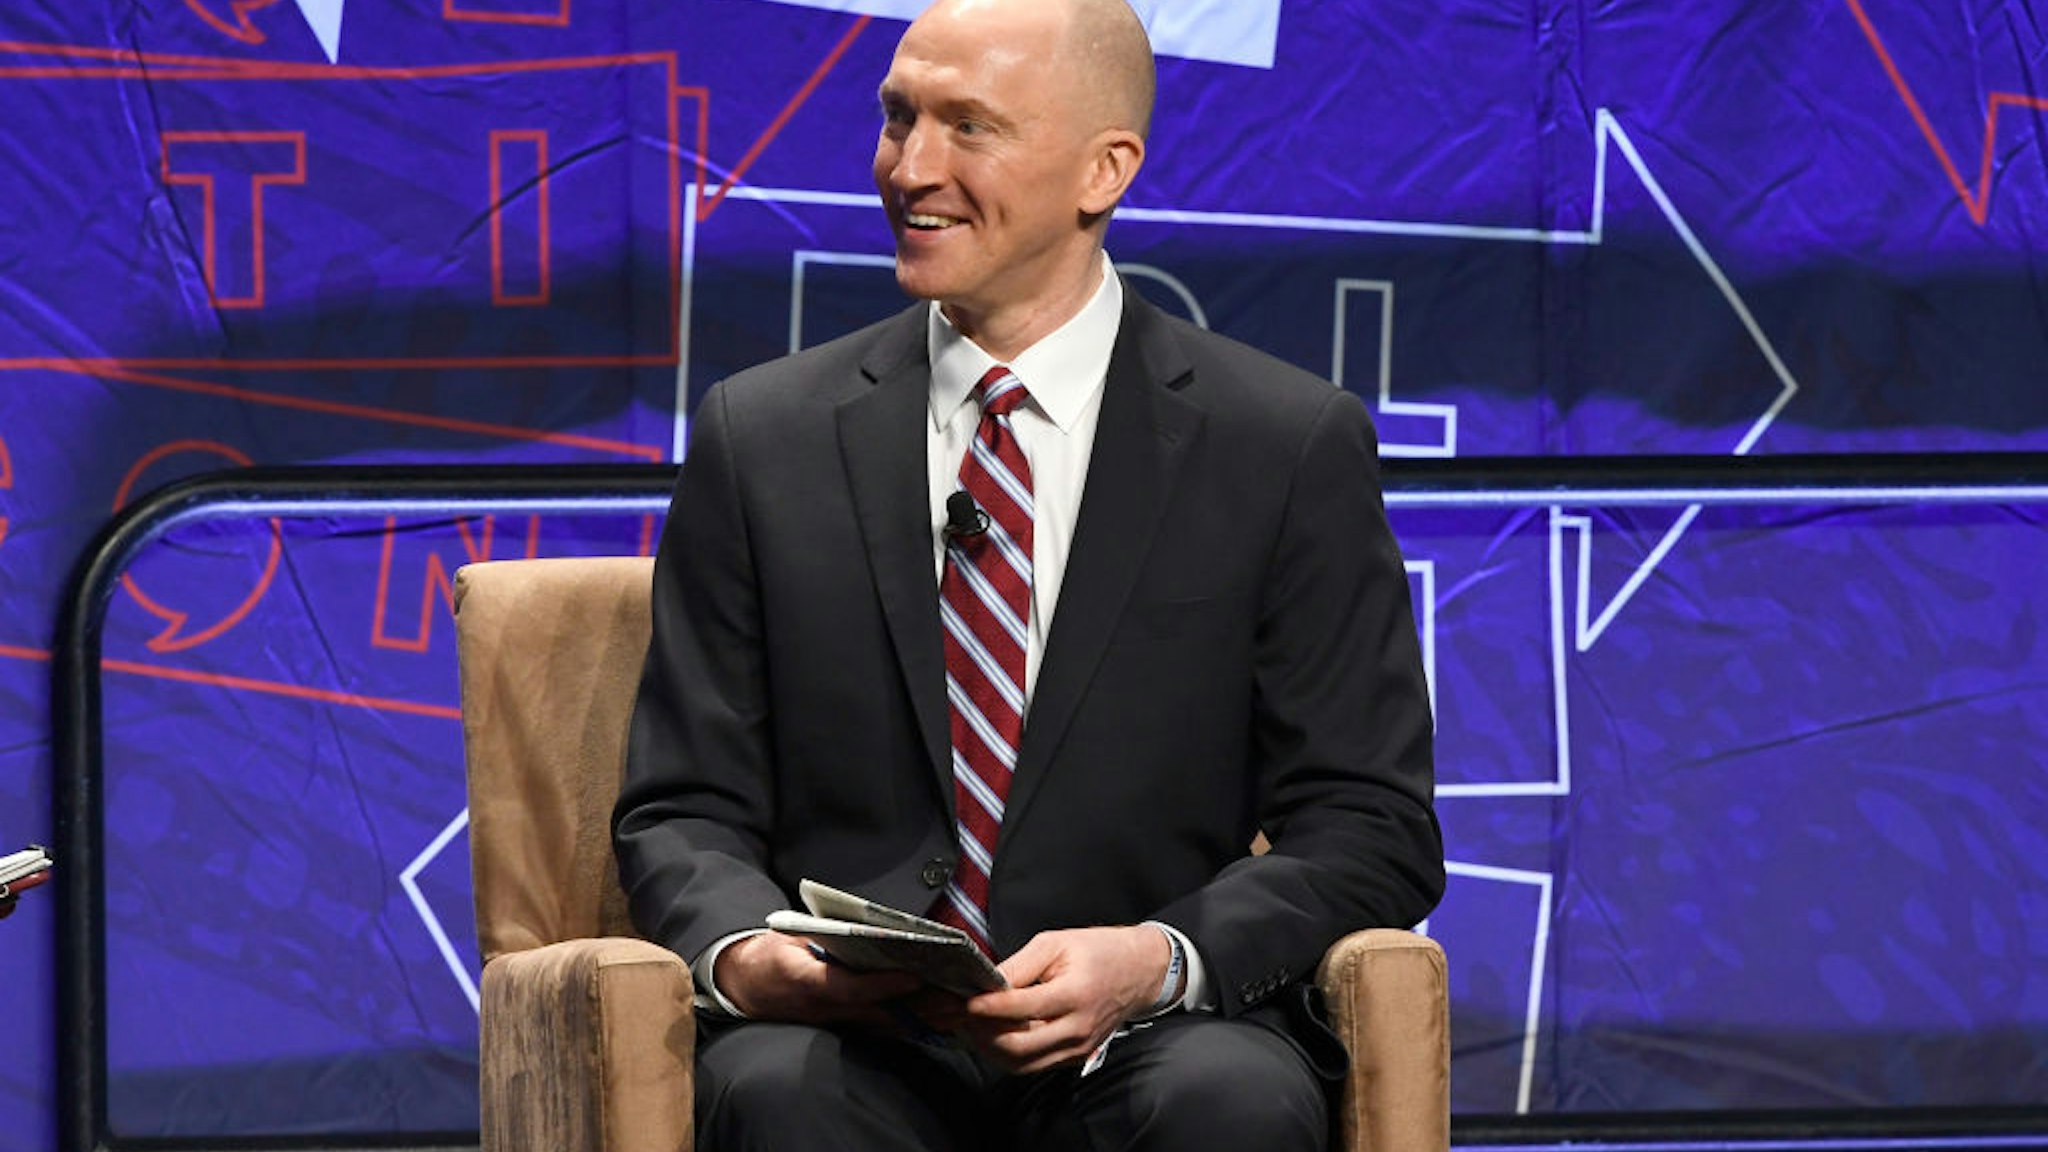 Carter Page speaks onstage at Politicon 2018 at Los Angeles Convention Center on October 20, 2018 in Los Angeles, California.